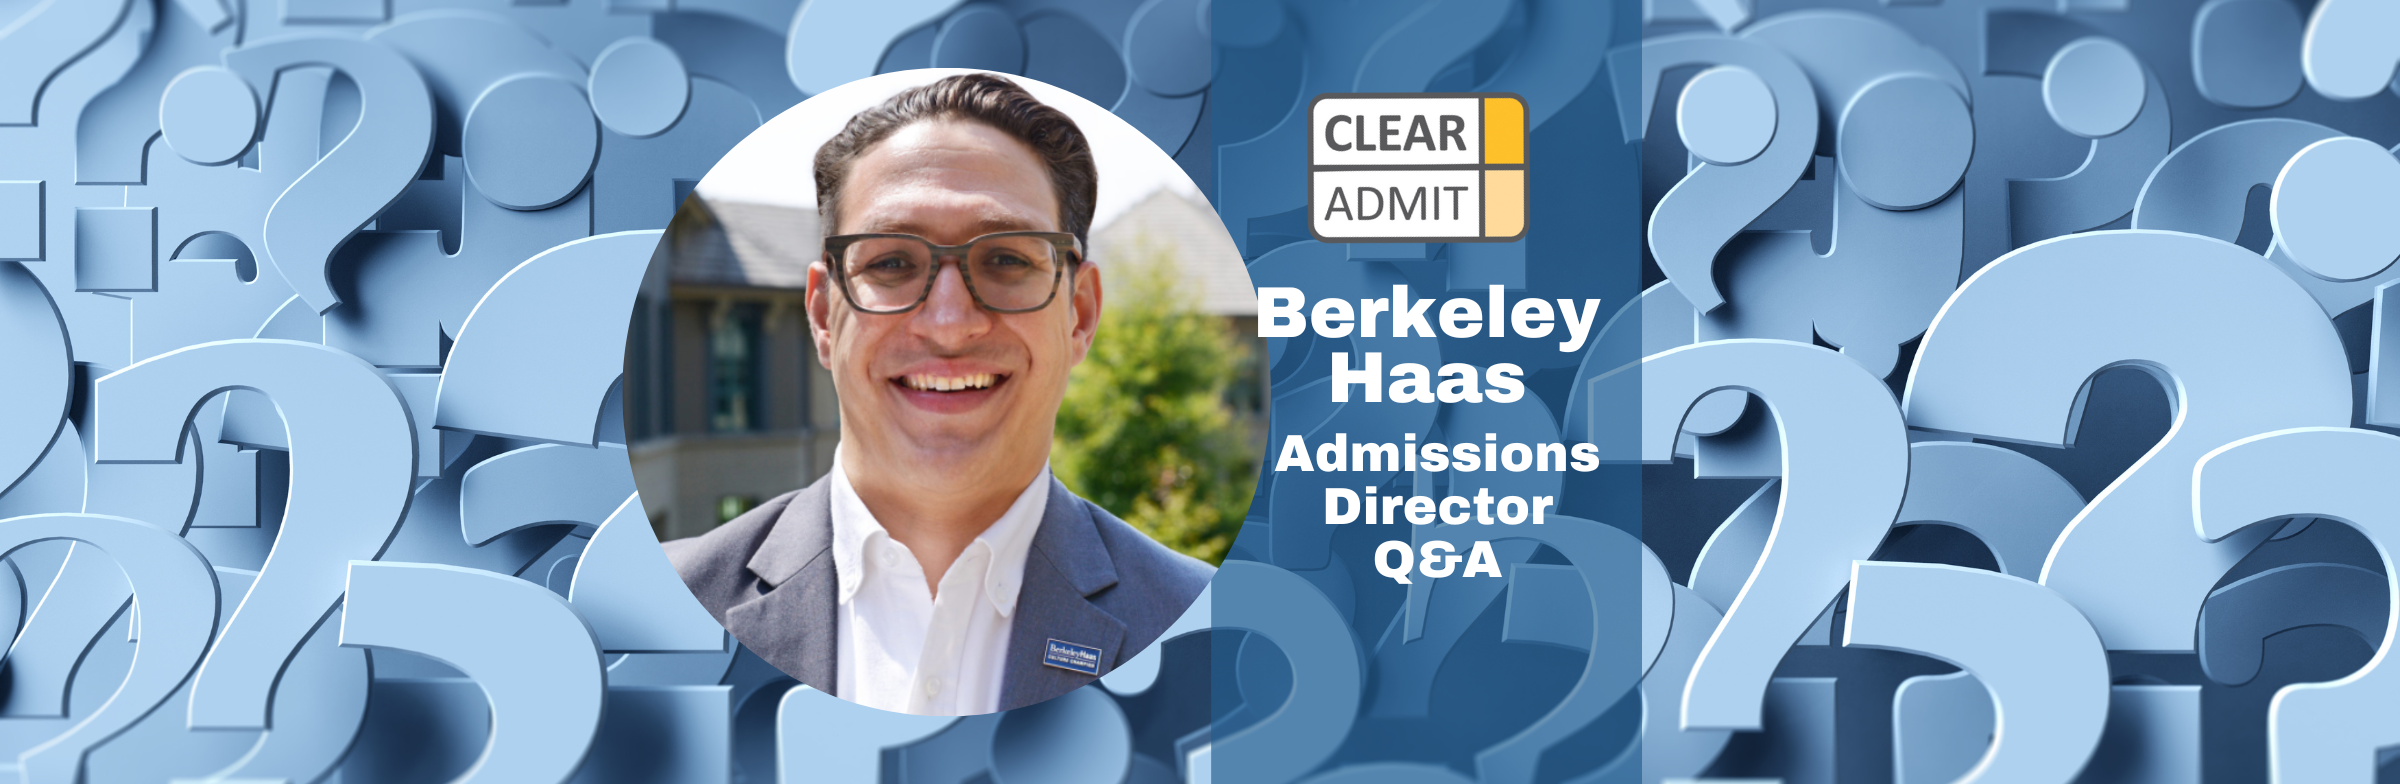 Image for Admissions Director Q&A: Eric Askins of UC Berkeley’s Haas School of Business